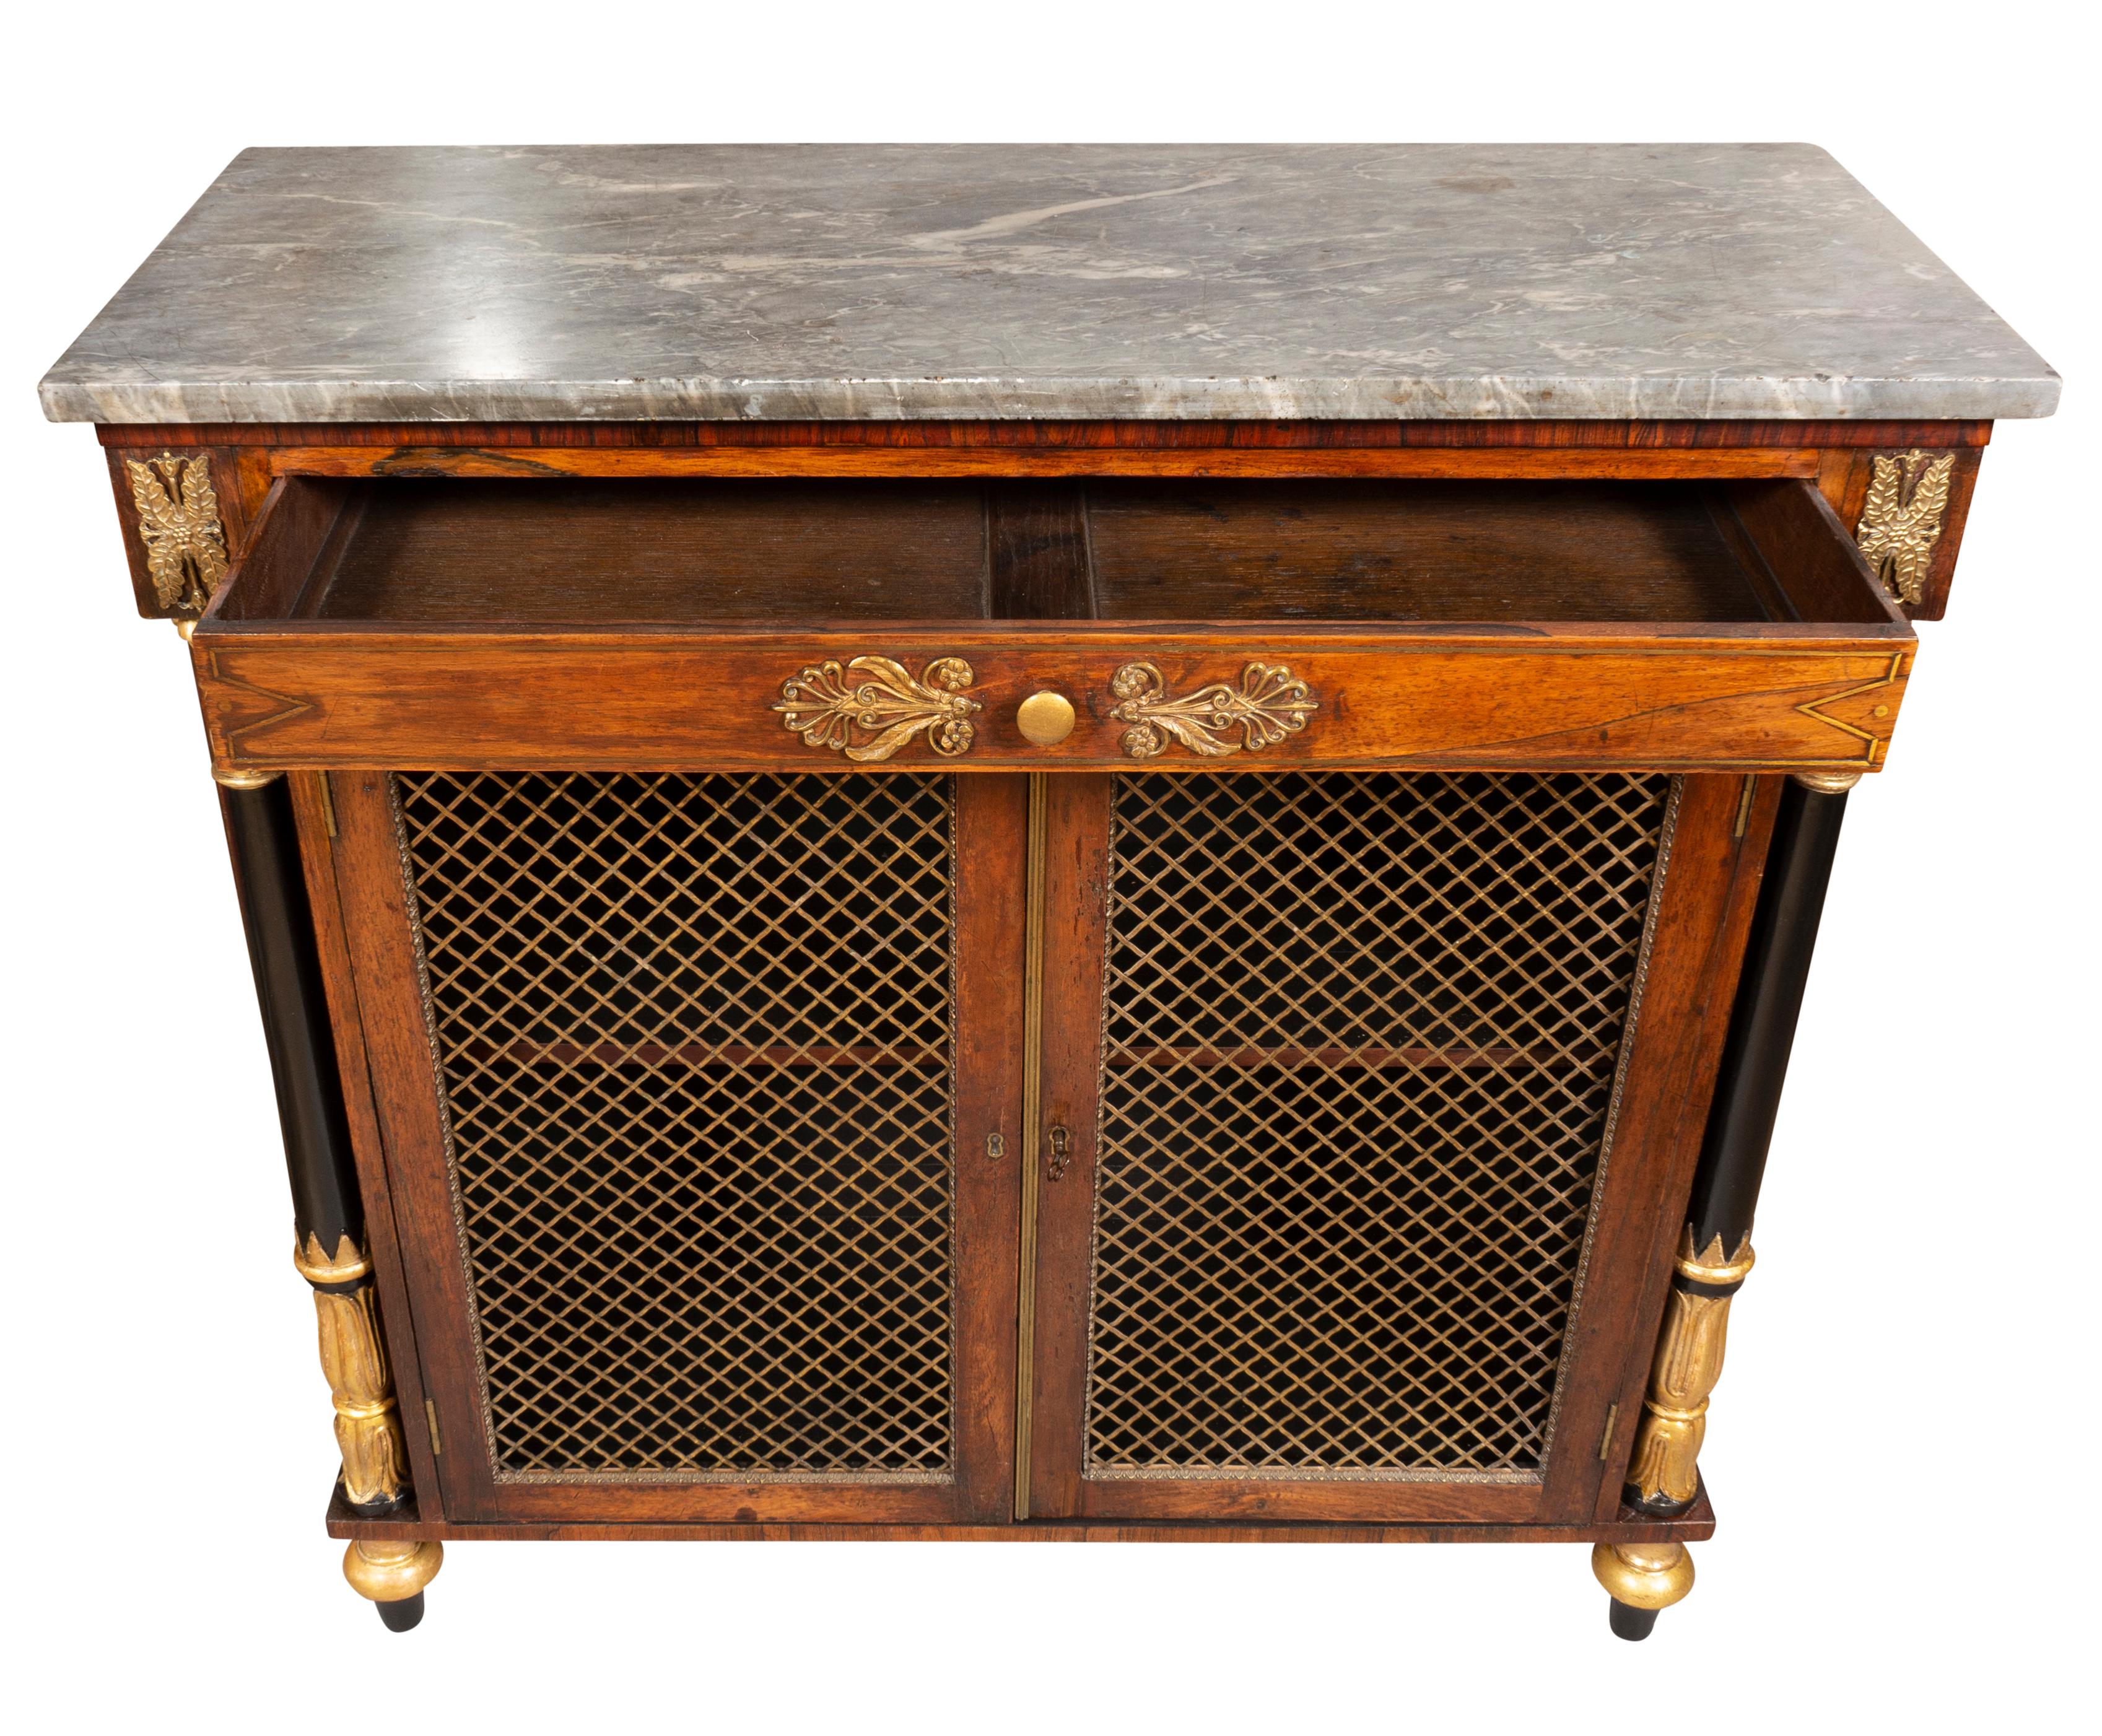 English Regency Rosewood And Brass Mounted Credenza